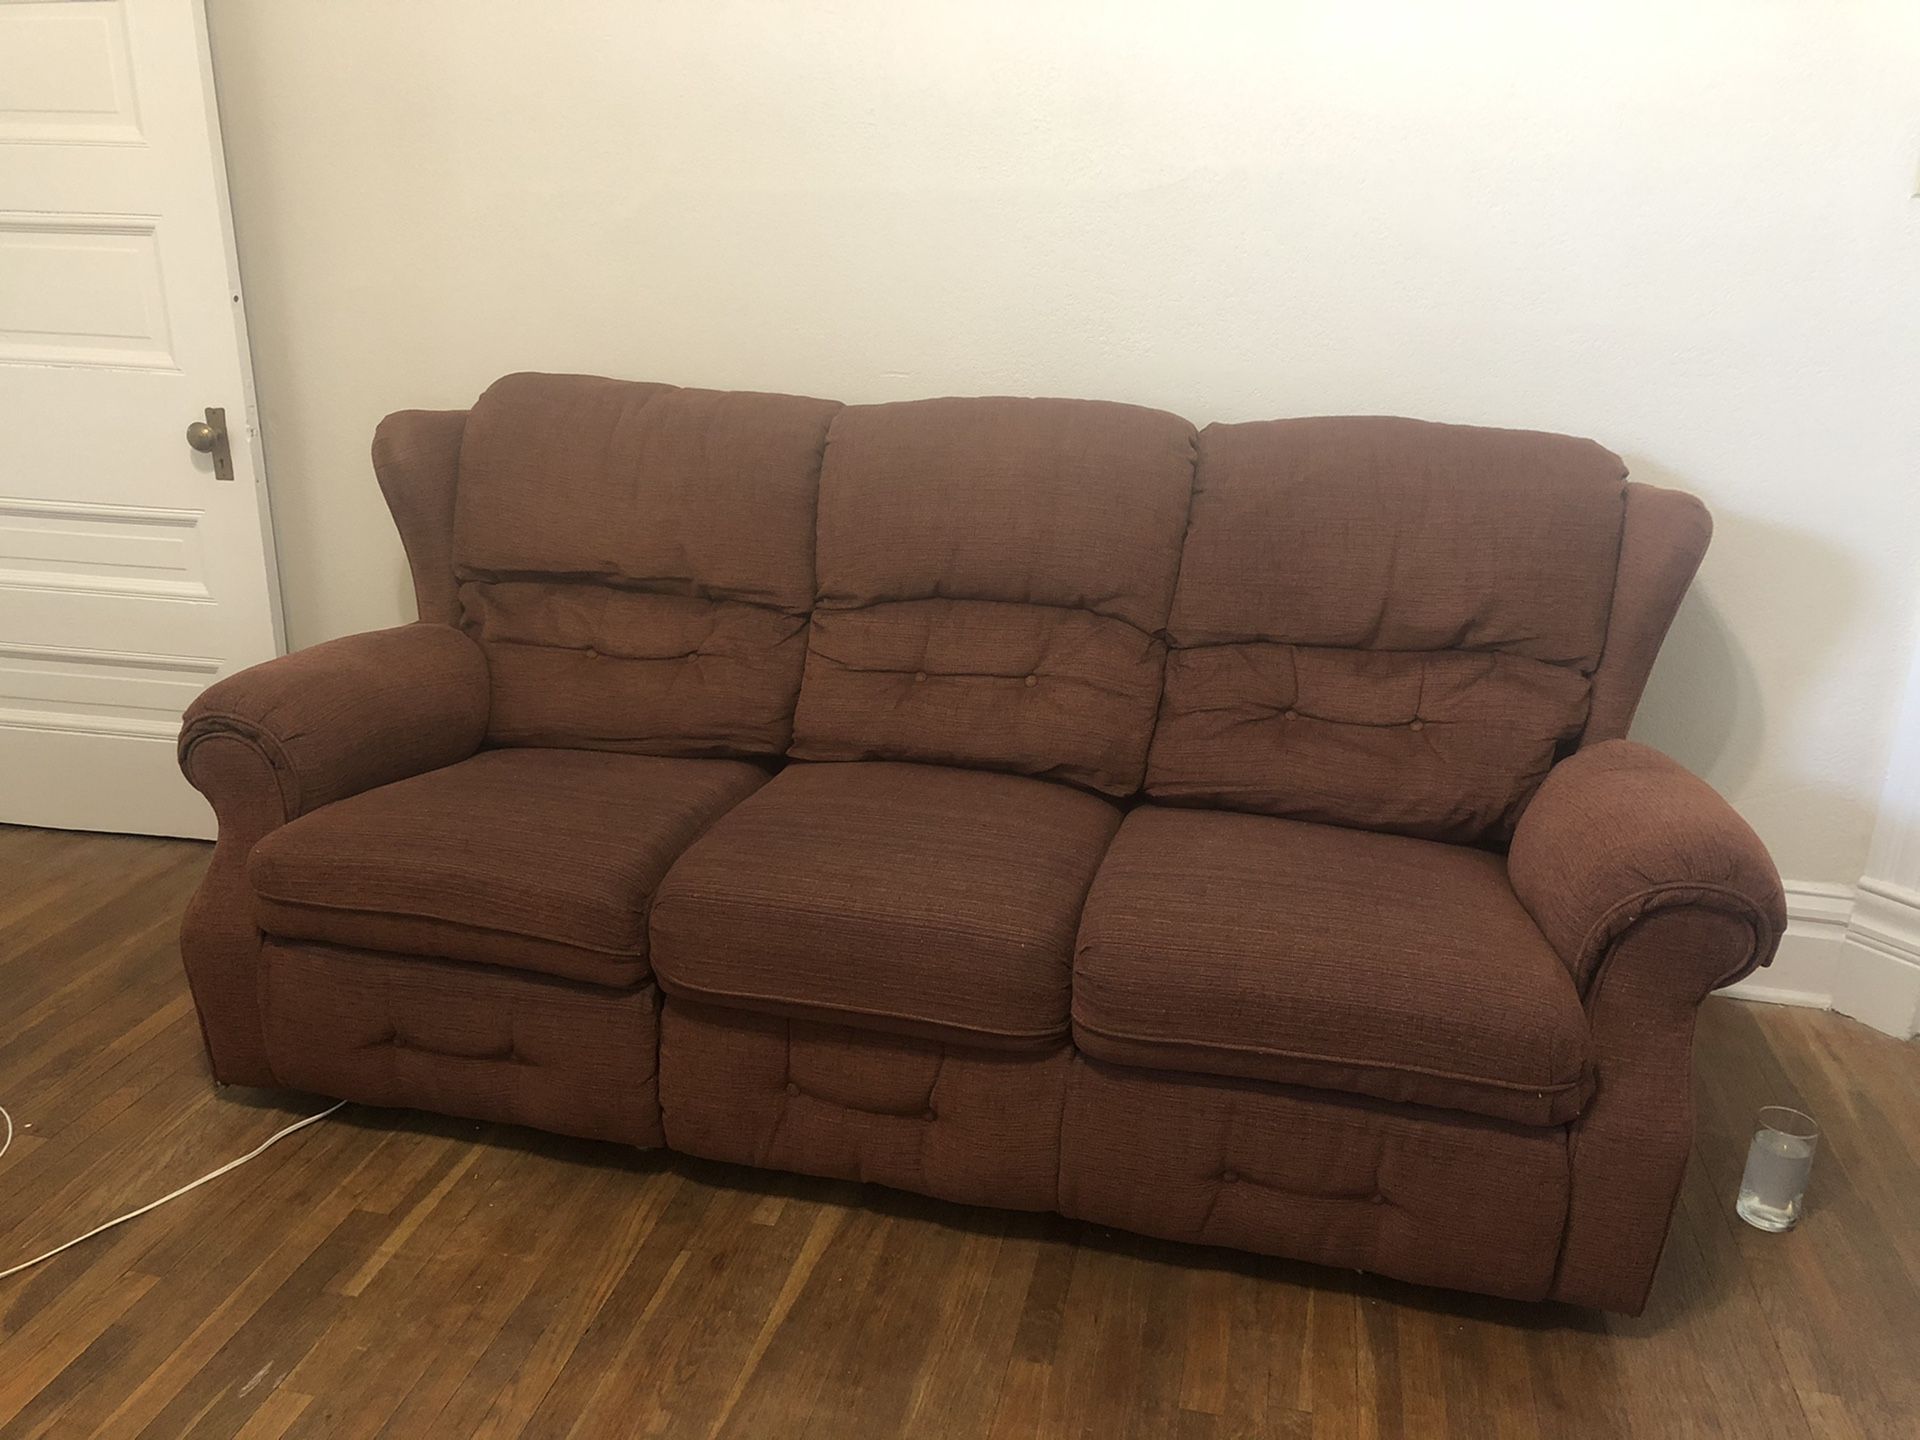 Free couch! Must be picked up